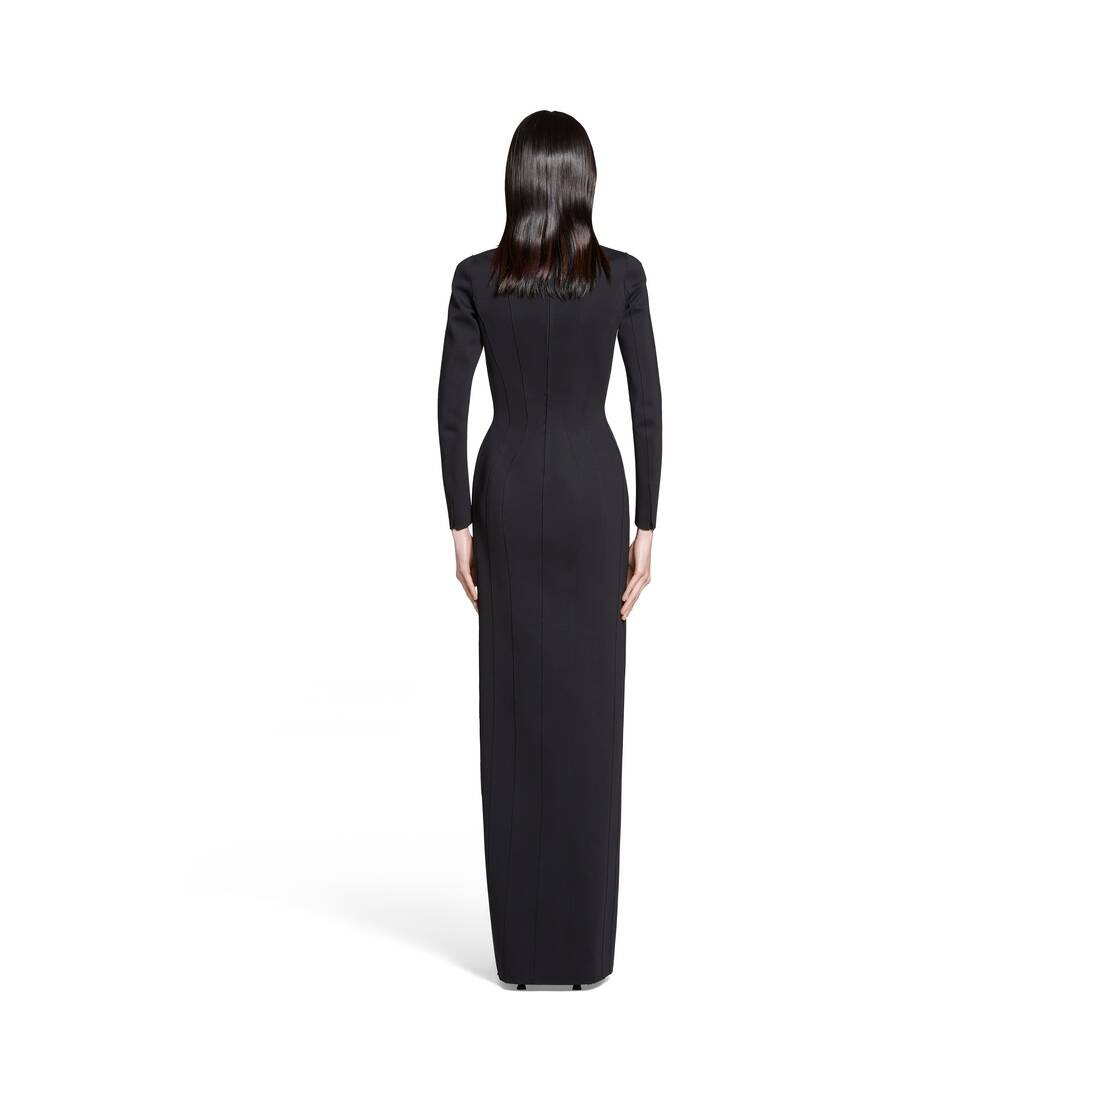 Women's Fitted Gown in Black - 5